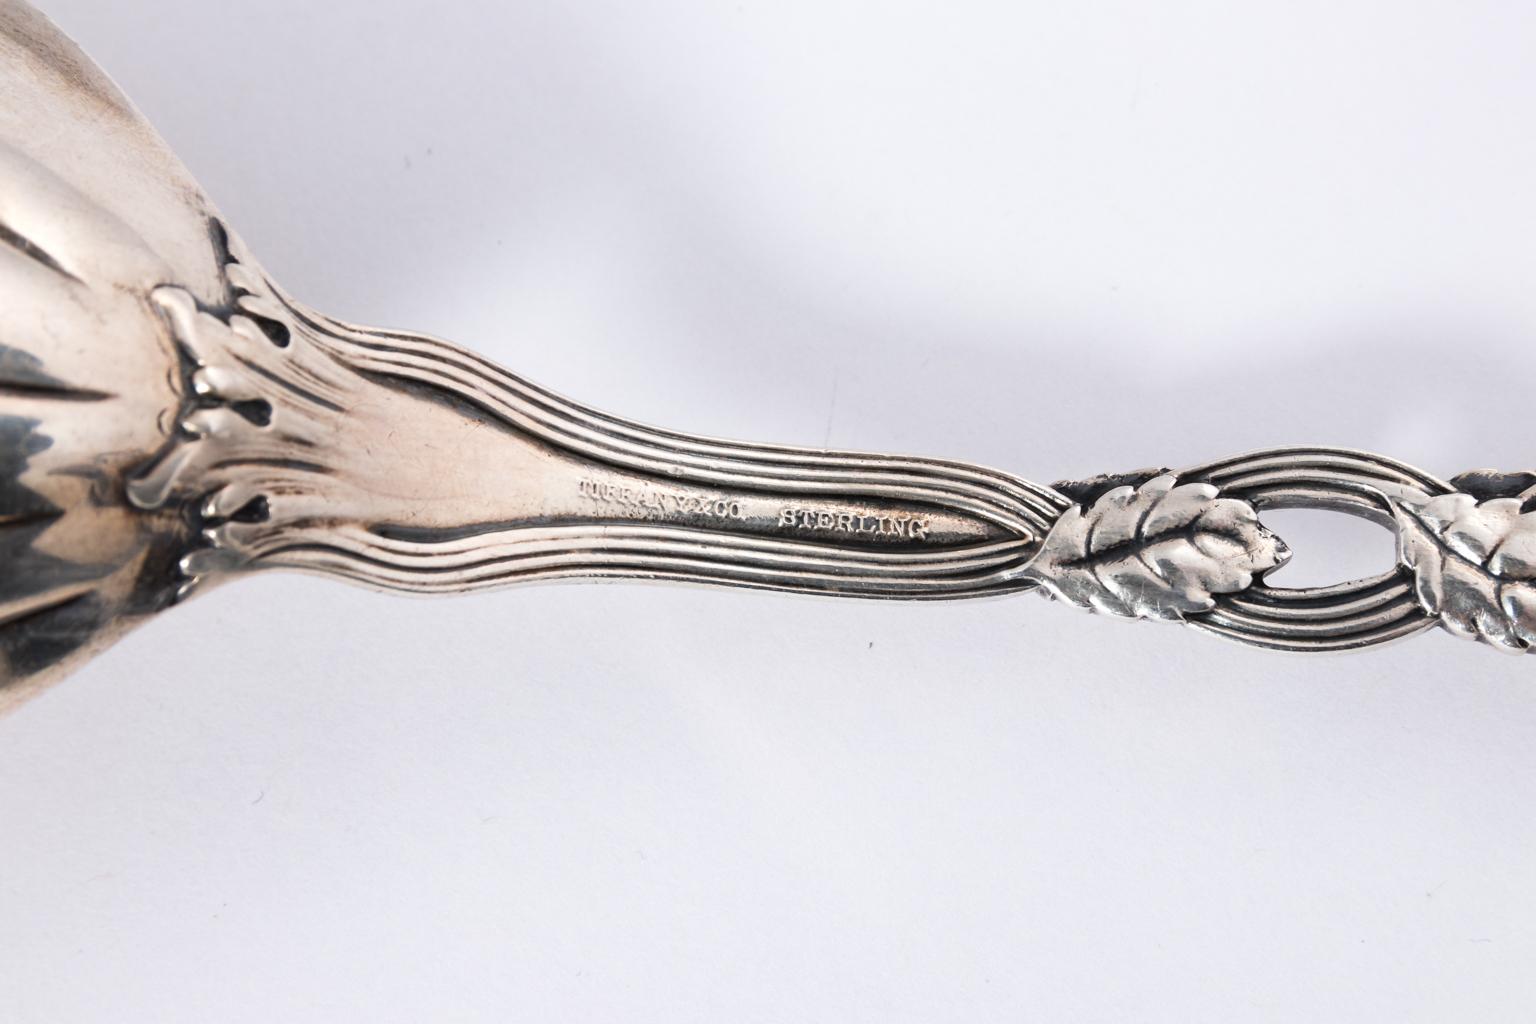 Tiffany & Company sterling silver kidney form serving spoon, circa 1875. The spoon weighs 4.09 Troy ounces and features a cluster of three strawberries with a twisted vine handle. The kidney shaped bowl portion is monogrammed with three intertwined